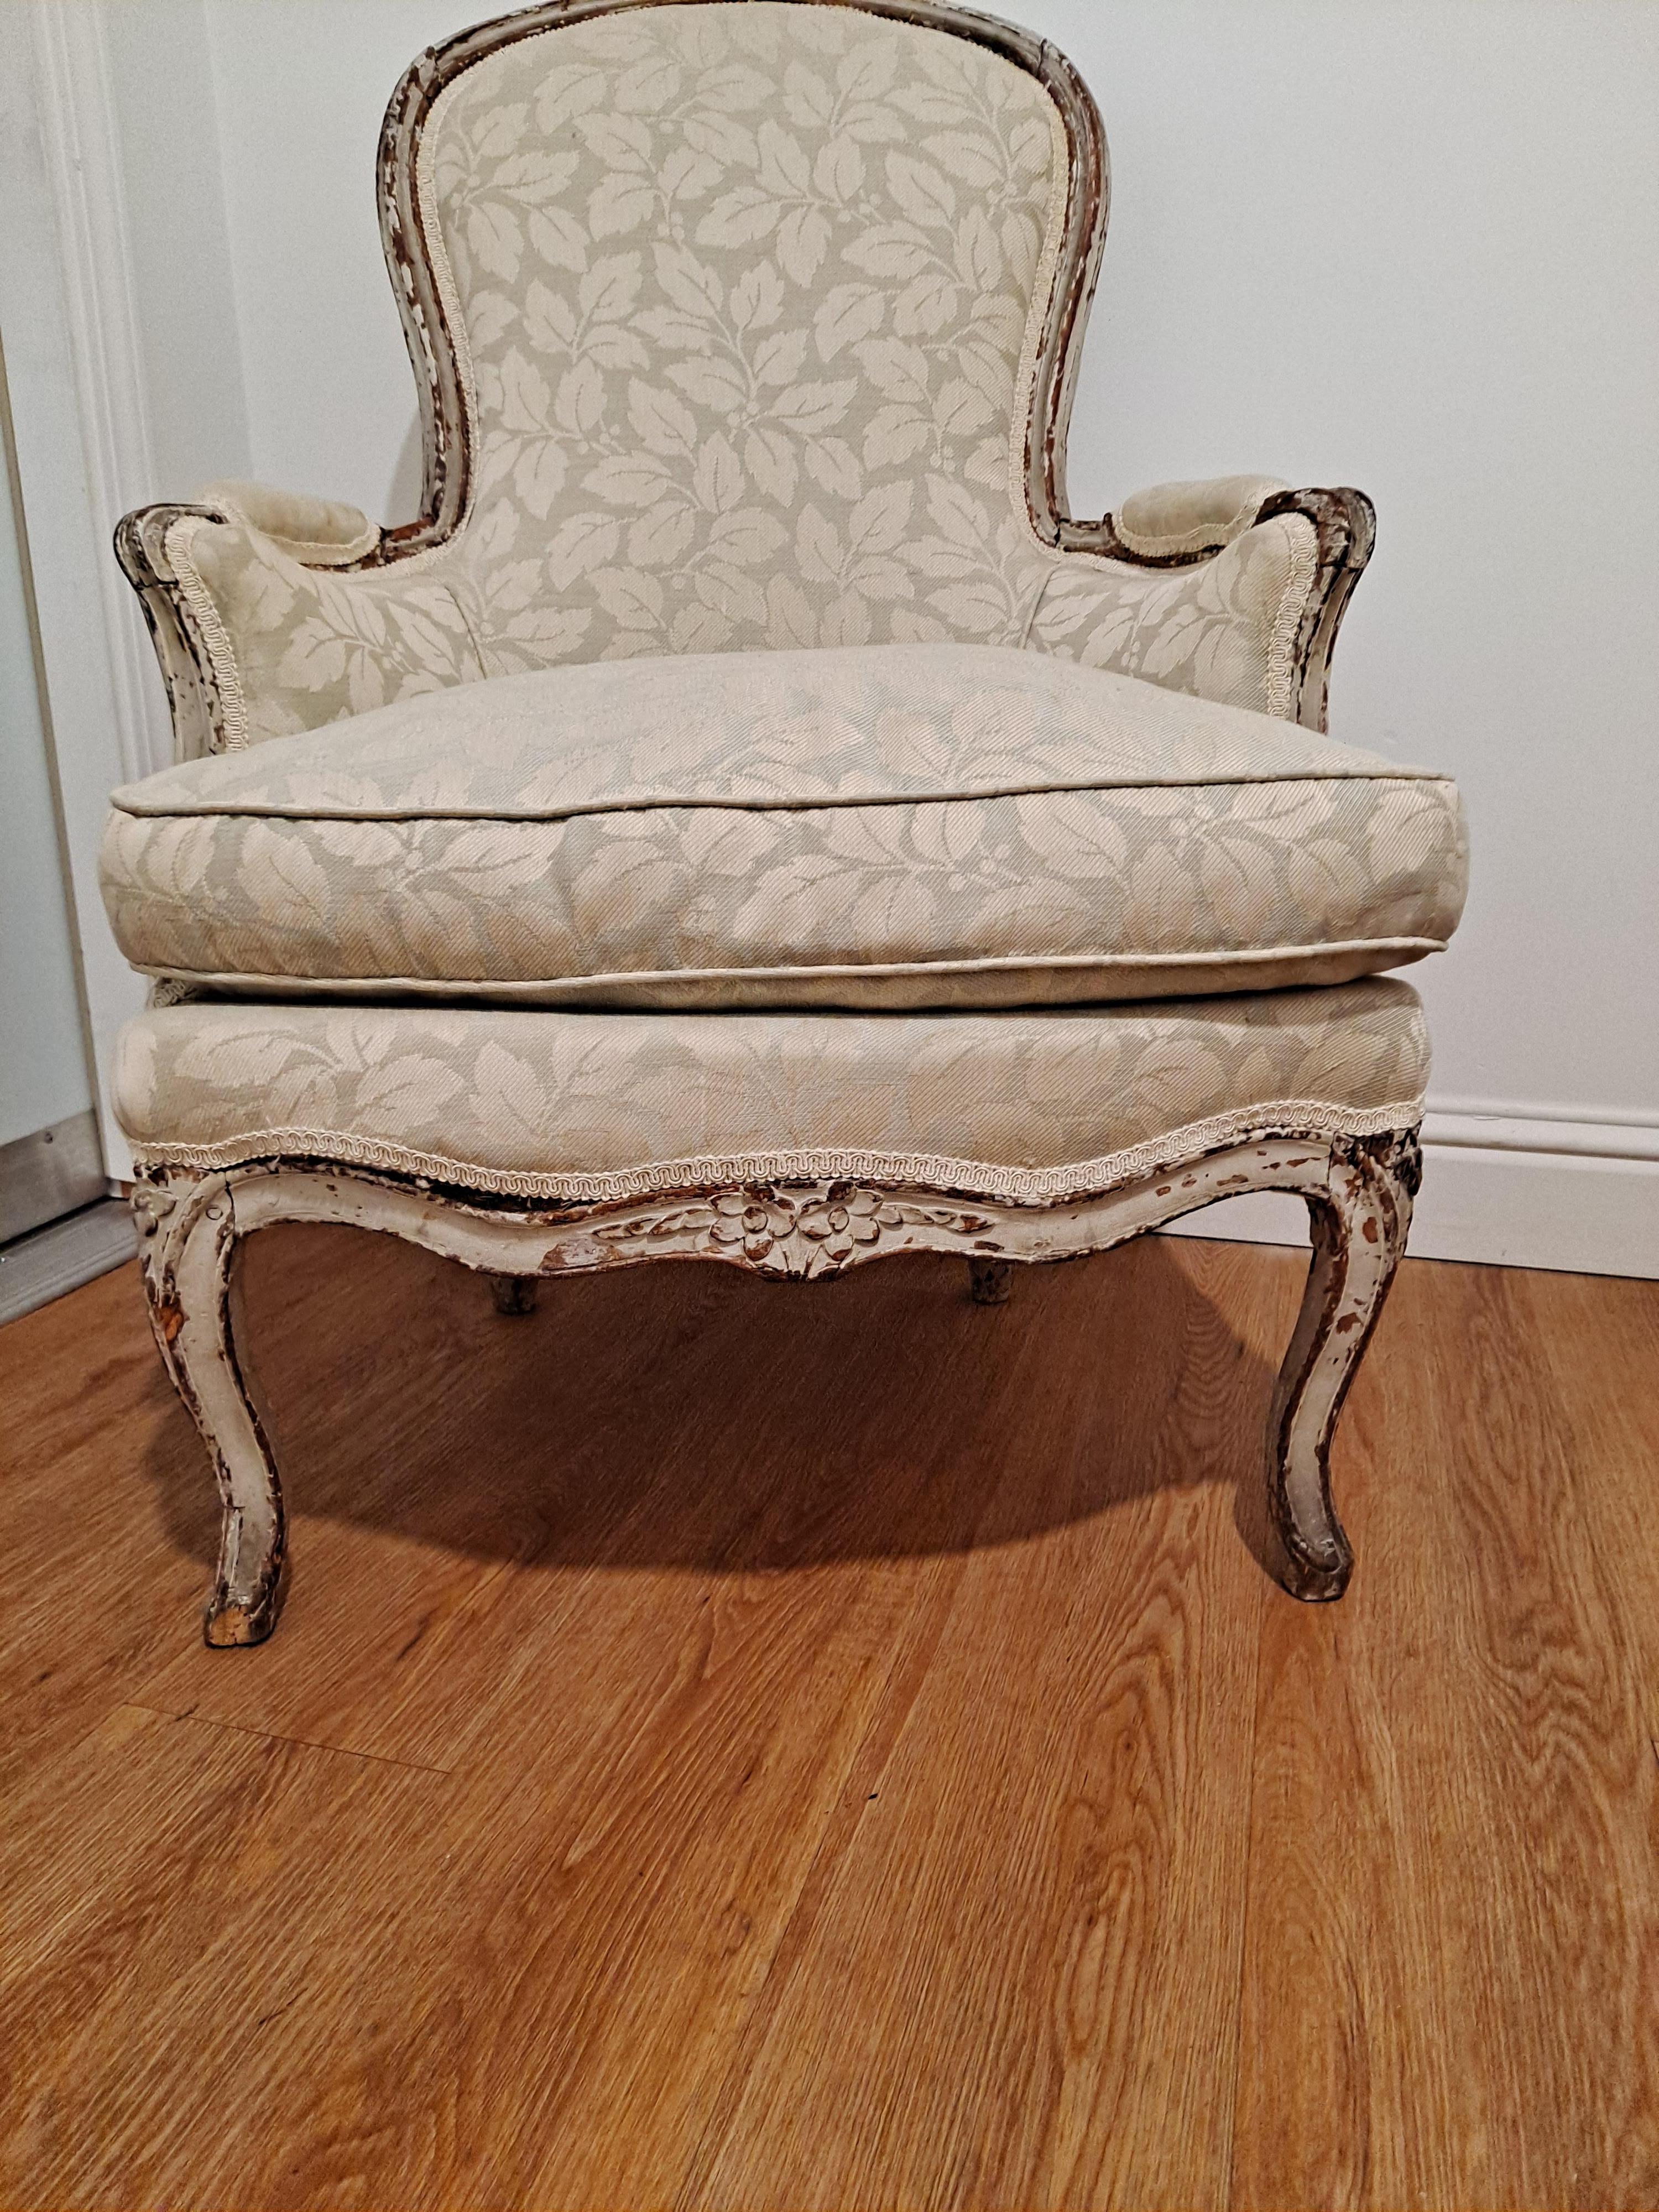 18th Century French Spoon Back Bergere Arm Chair

With later leaf print upholstery & cushion seat

26